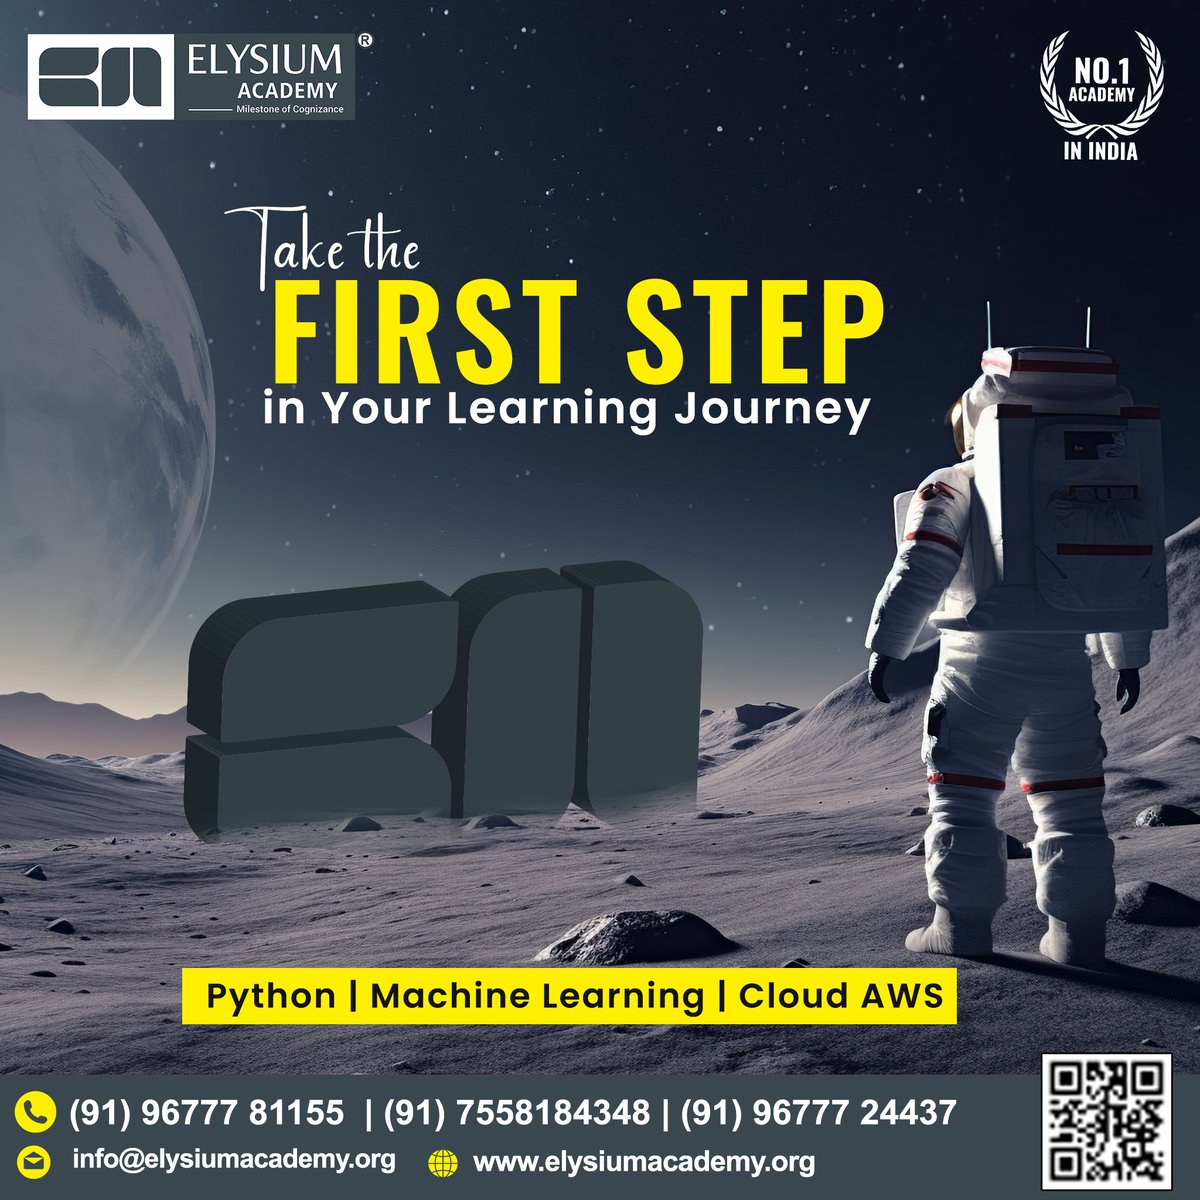 ELYSIUM ACADEMY PVT LTD
IT Training Institutes in #madurai

Get Skilled...Get Hired...
📷Elysium Academy offers many #opportunities to learn new skills and pro
#elysiumacademy #no1academy #tesbocourse #jobassurane #itcareer #it #itjobs #coding #job #technology #freeworkshop